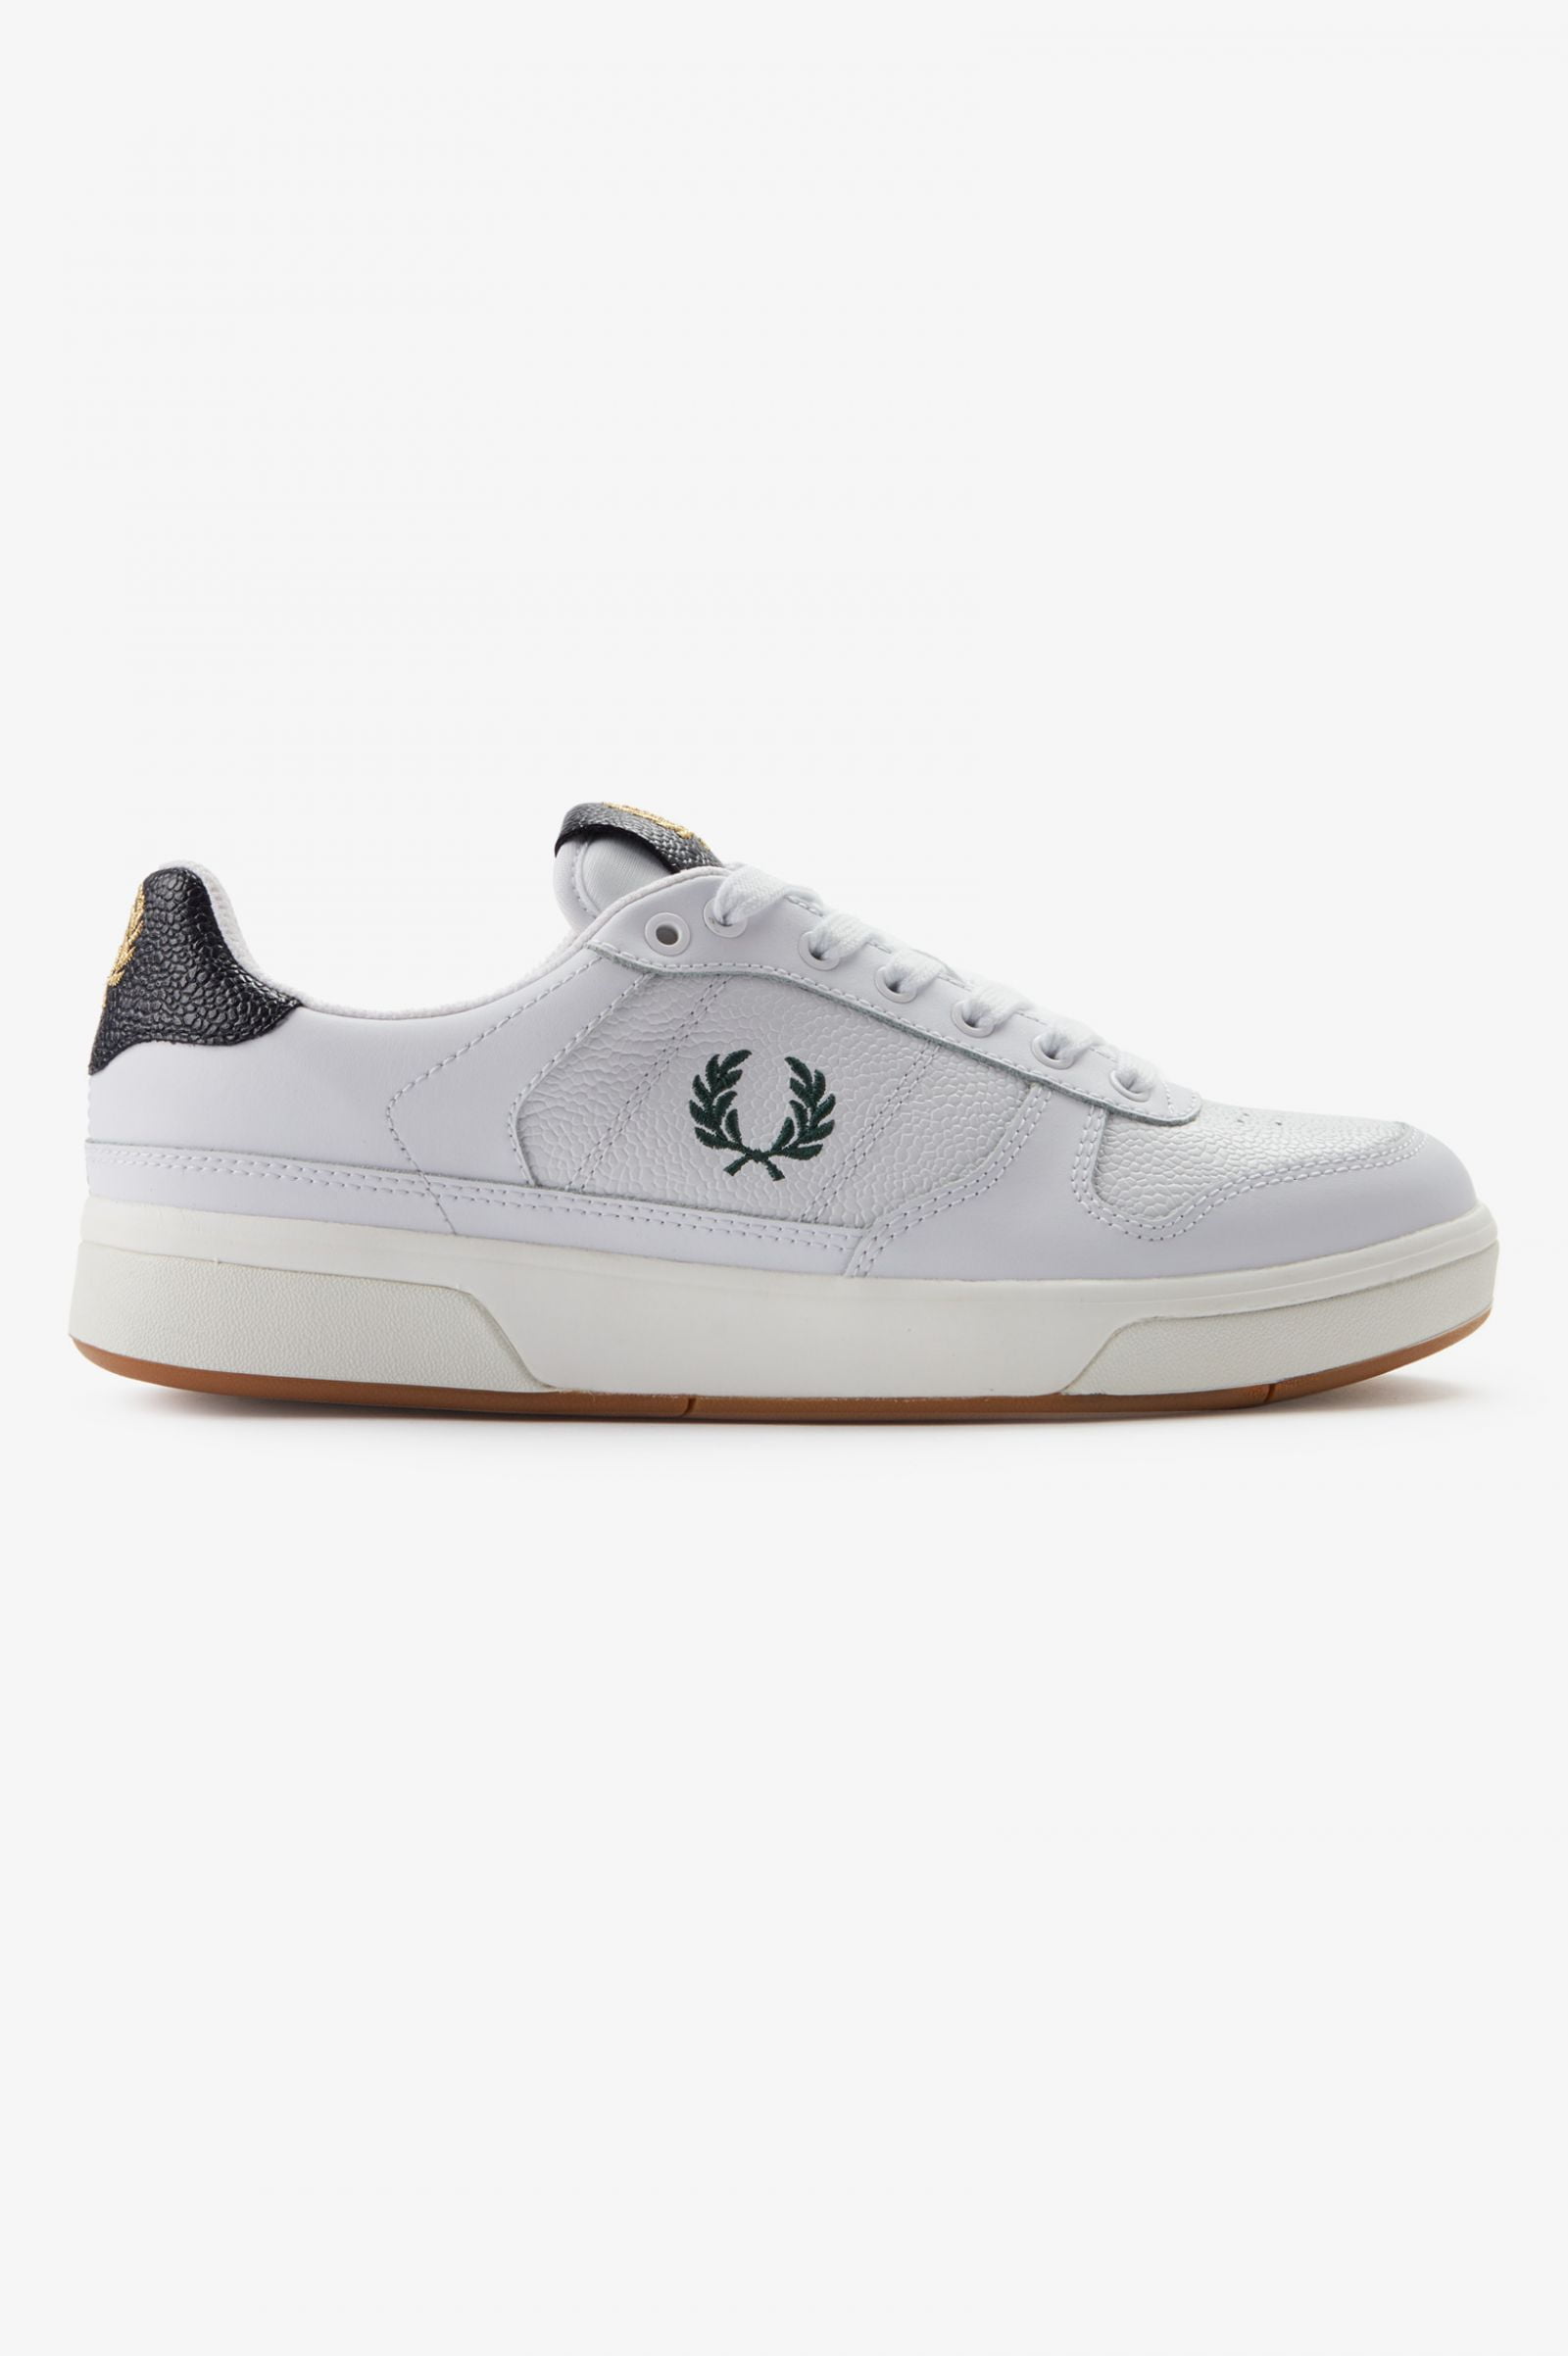 TÊNIS FRED PERRY SCOTCHGRAIN LEATHER